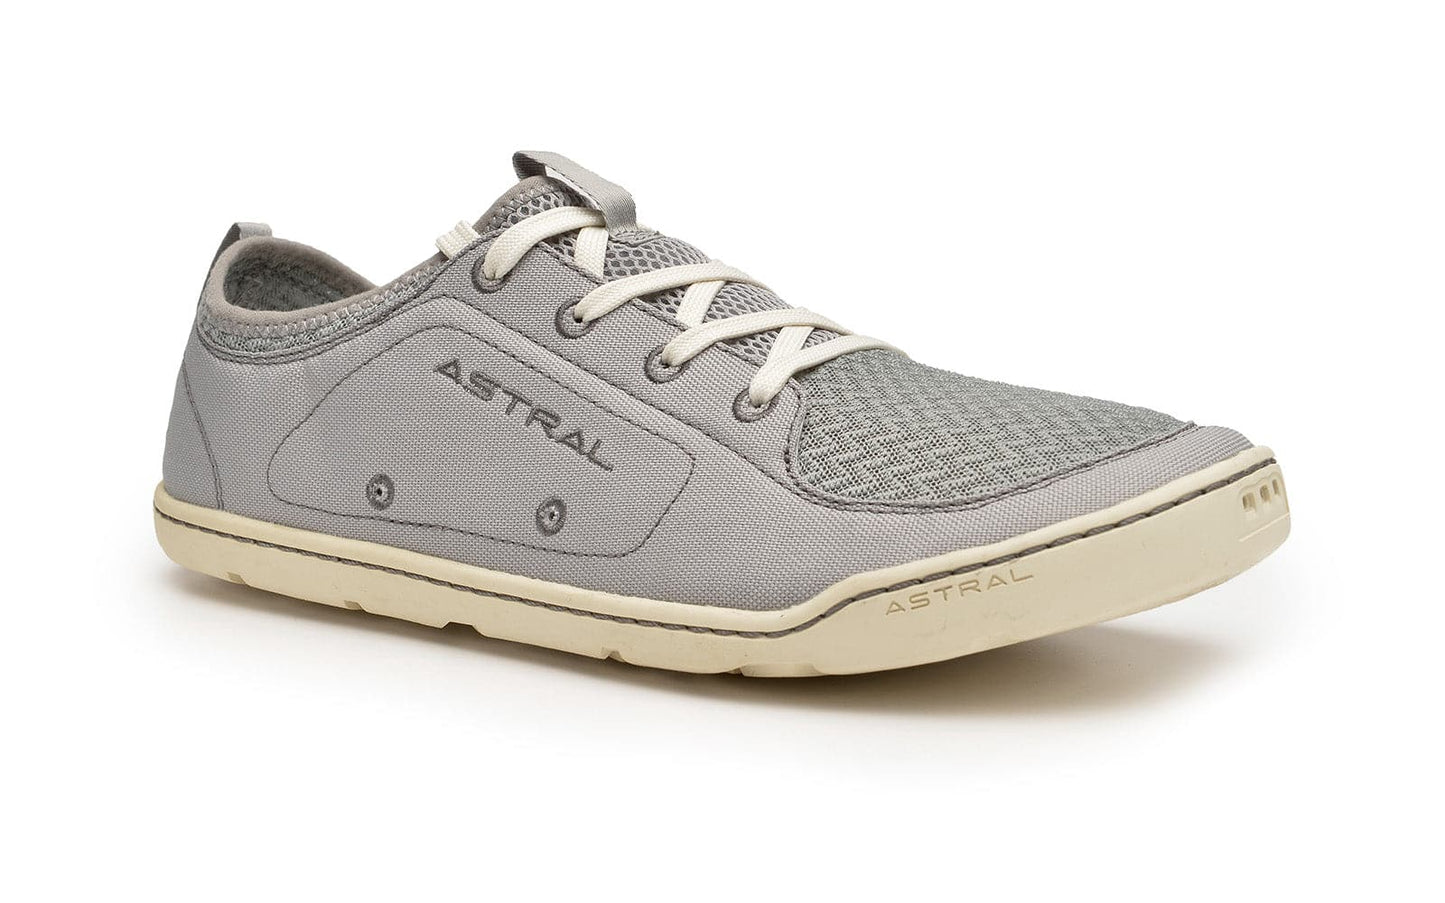 Featuring the Loyak - Men's men's footwear manufactured by Astral shown here from an eighth angle.